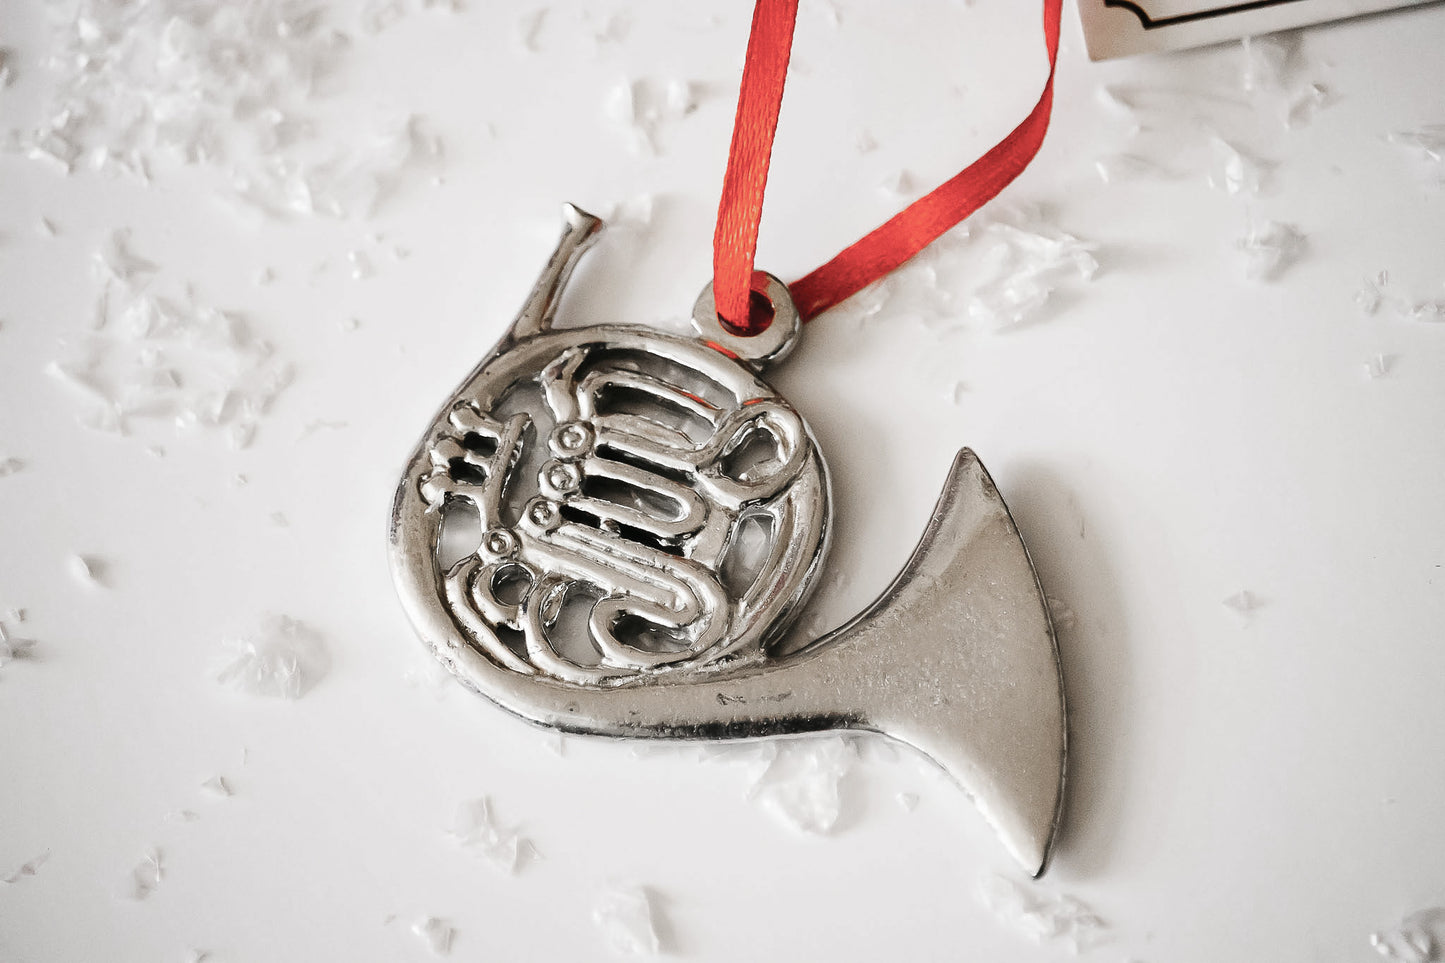 French Horn Gift - French Horn Christmas Ornament - Music Instrument Gift